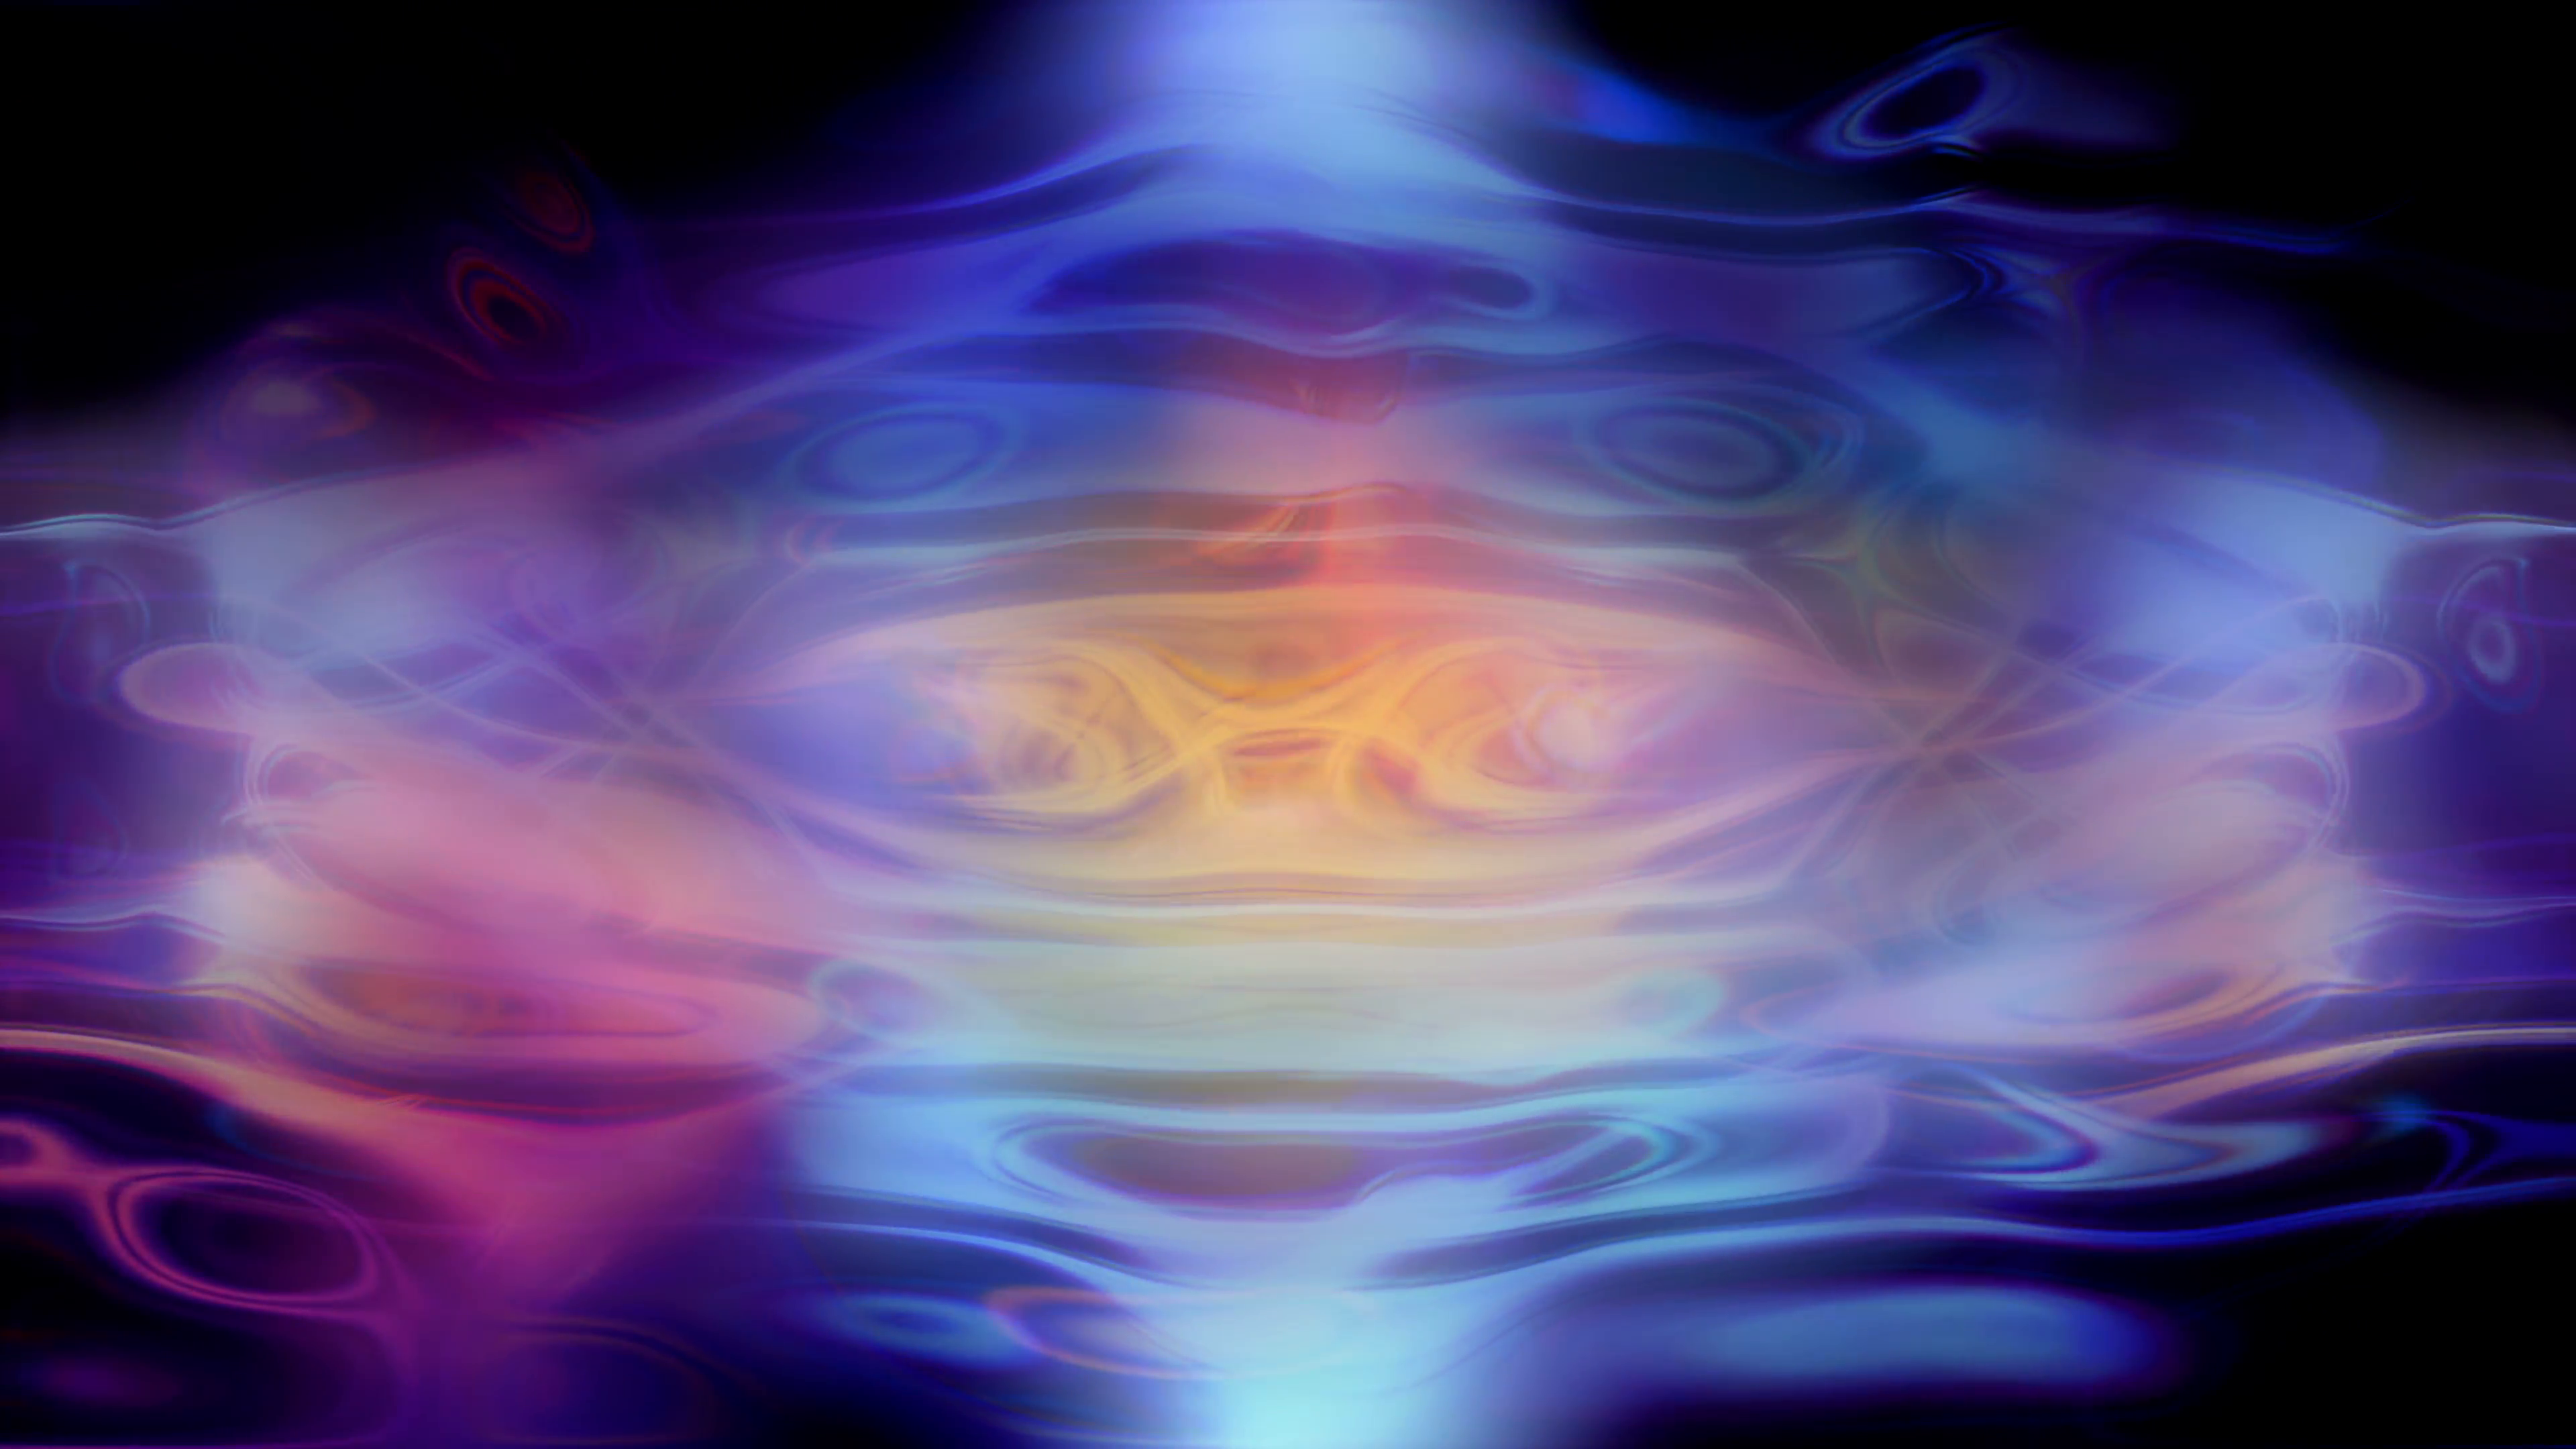 Video Background 2226: Abstract fluid light patterns glow, ripple ...